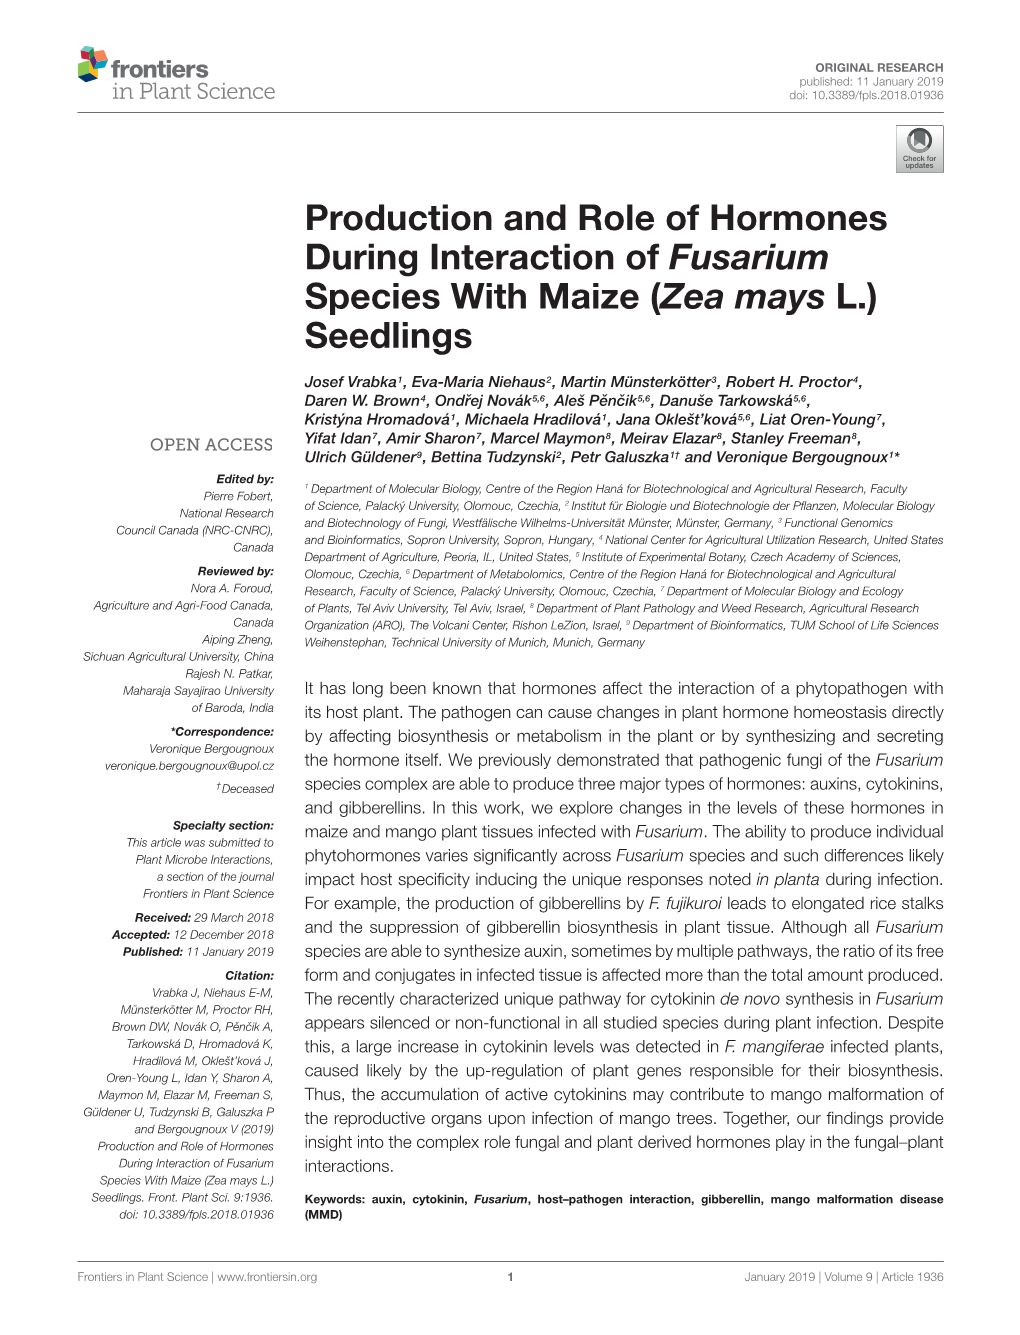 Production and Role of Hormones During Interaction of Fusarium Species with Maize (Zea Mays L.) Seedlings